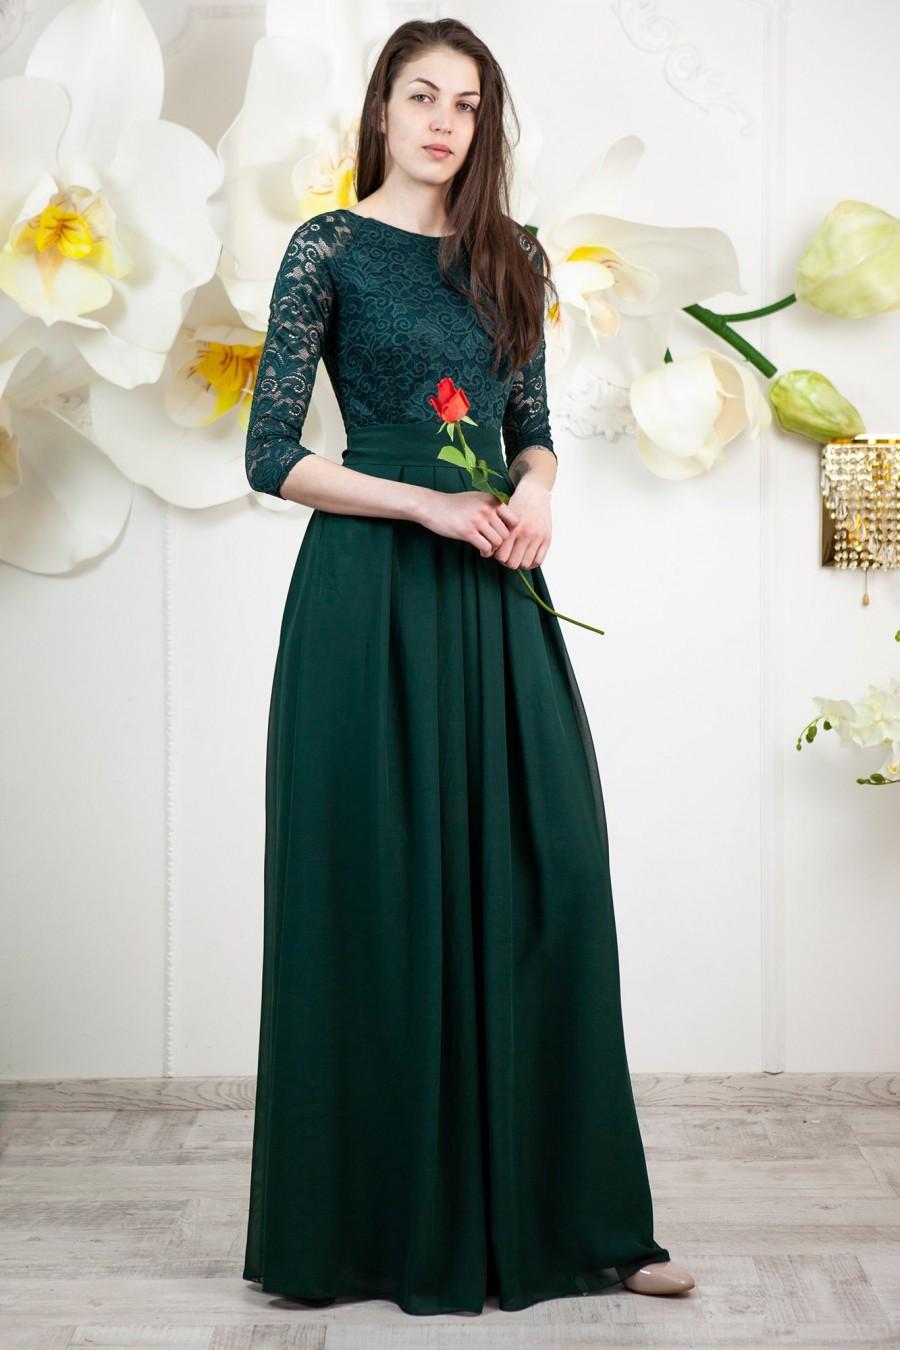 Wedding - Green bridesmaid dress. Long lace dress with 3/4 sleeves. Mother of the groom dress. Junior bridesmaid dress. Evening gown